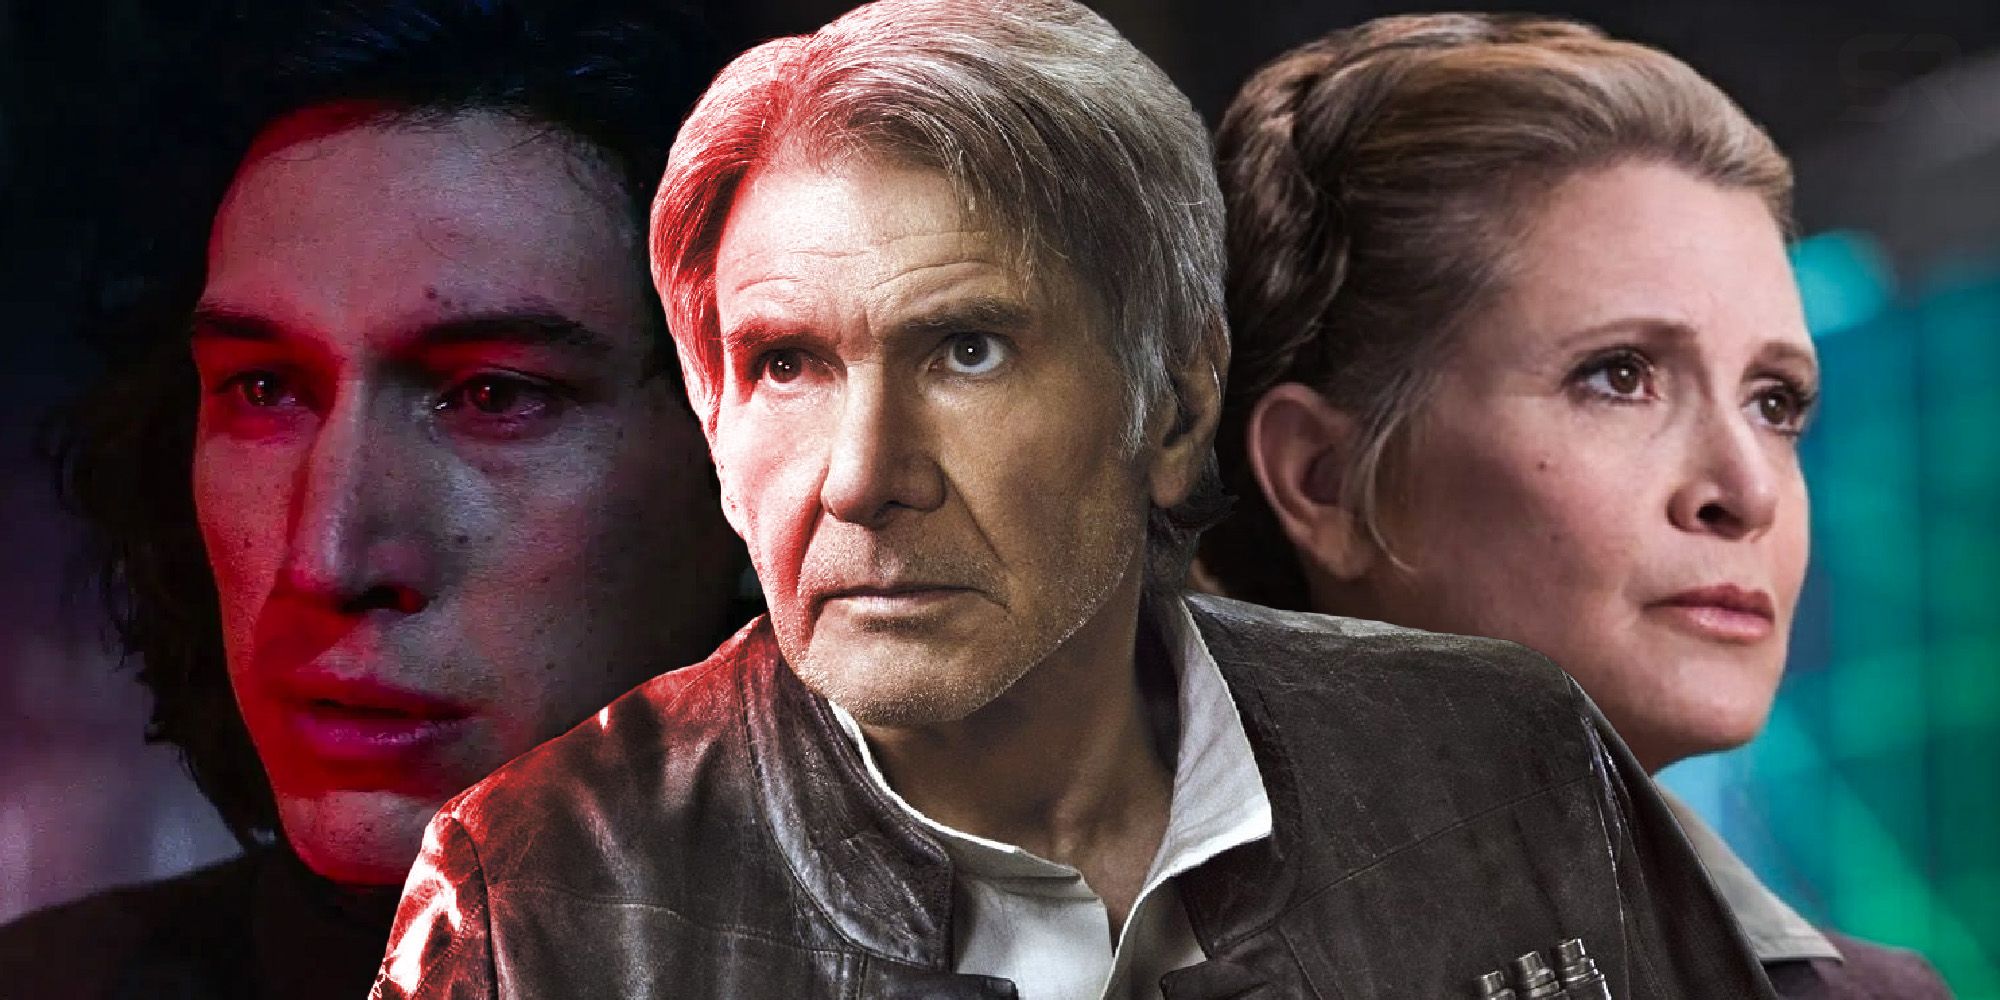 A collage of the faces of Han Solo, Kylo Ren and Leia in Star Wars The Force Awakens